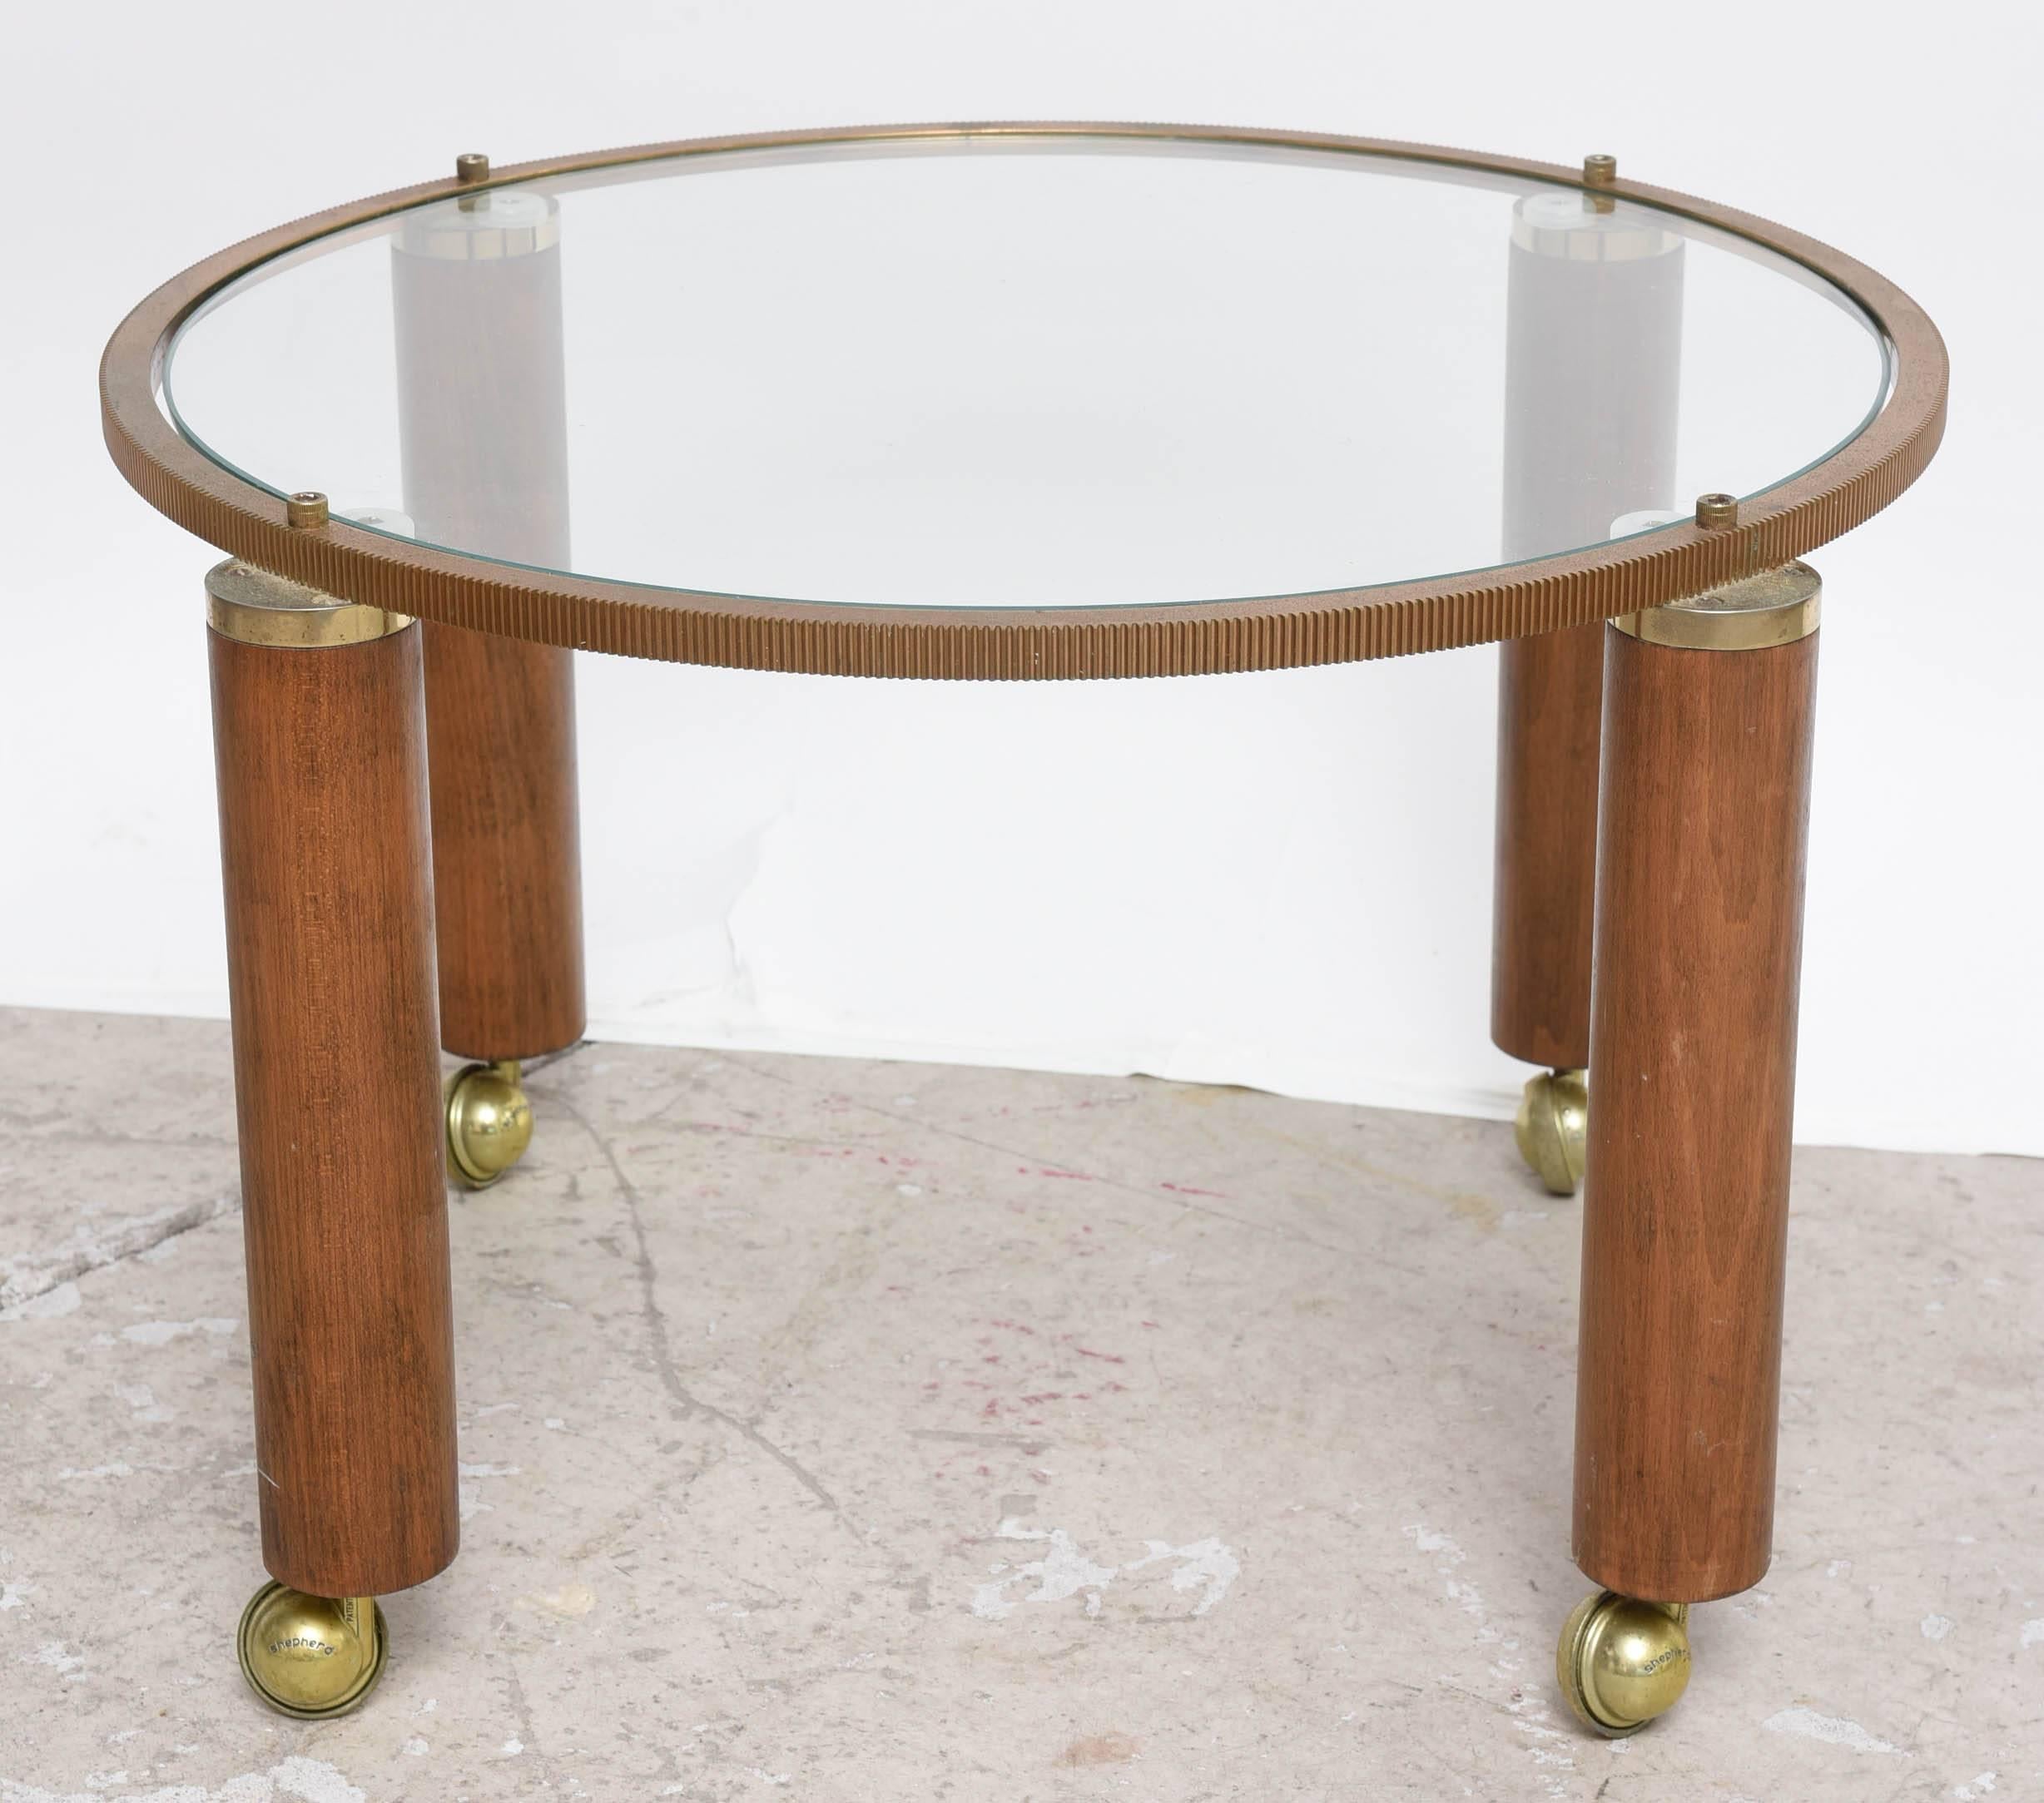 Pair of Mid-Century Modern side tables. The wood legs are on casters and the construction is mixed of metal and wood. The stylized mechanical in copper finish ring top holds a clear 20